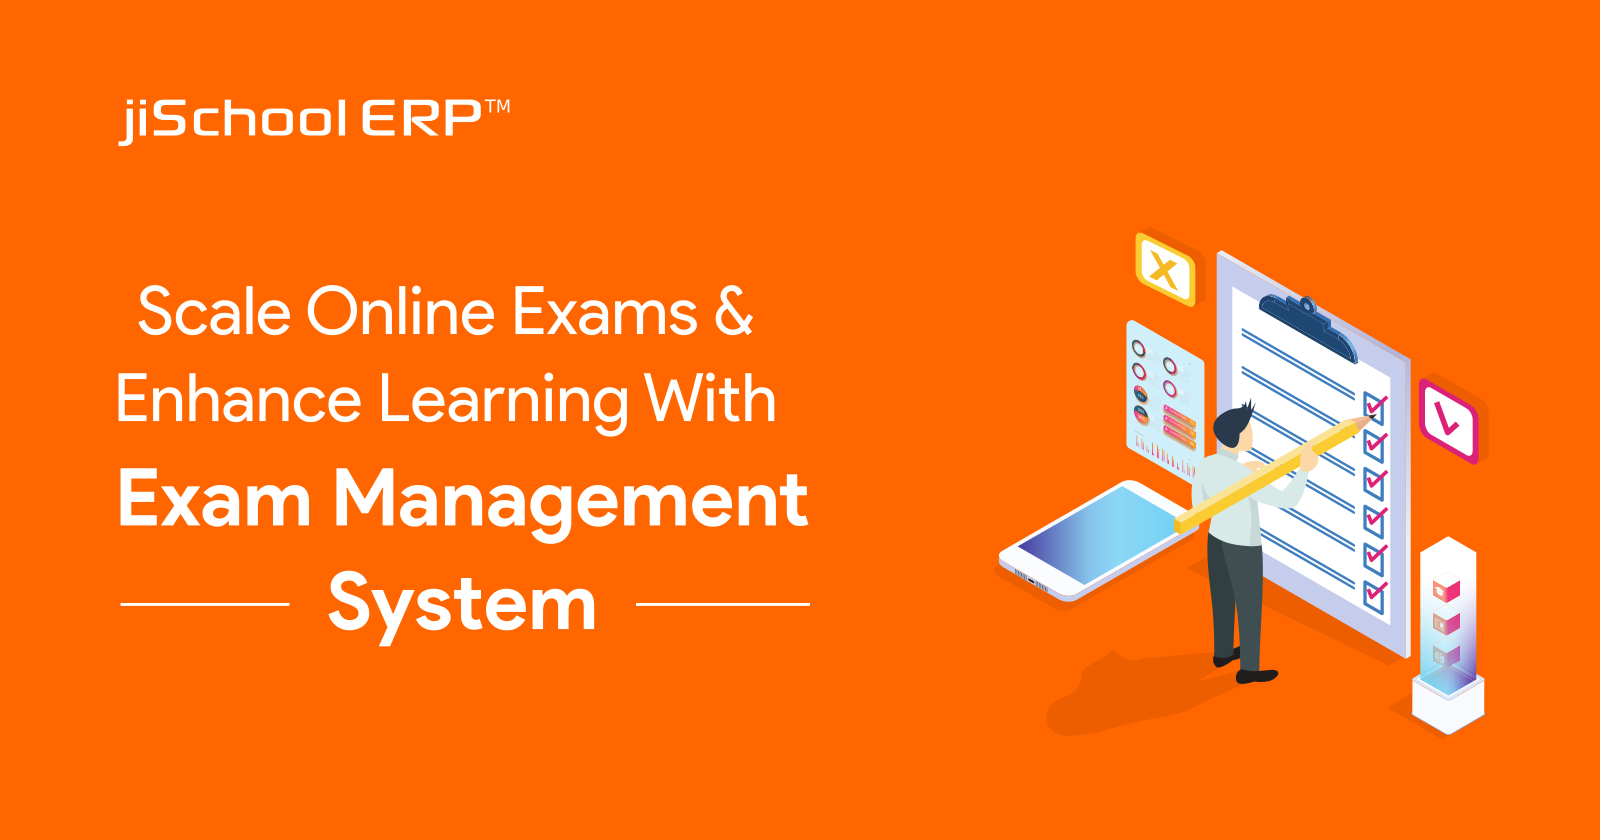 Scale Online Exams and Enhance Learning with Exam Management System